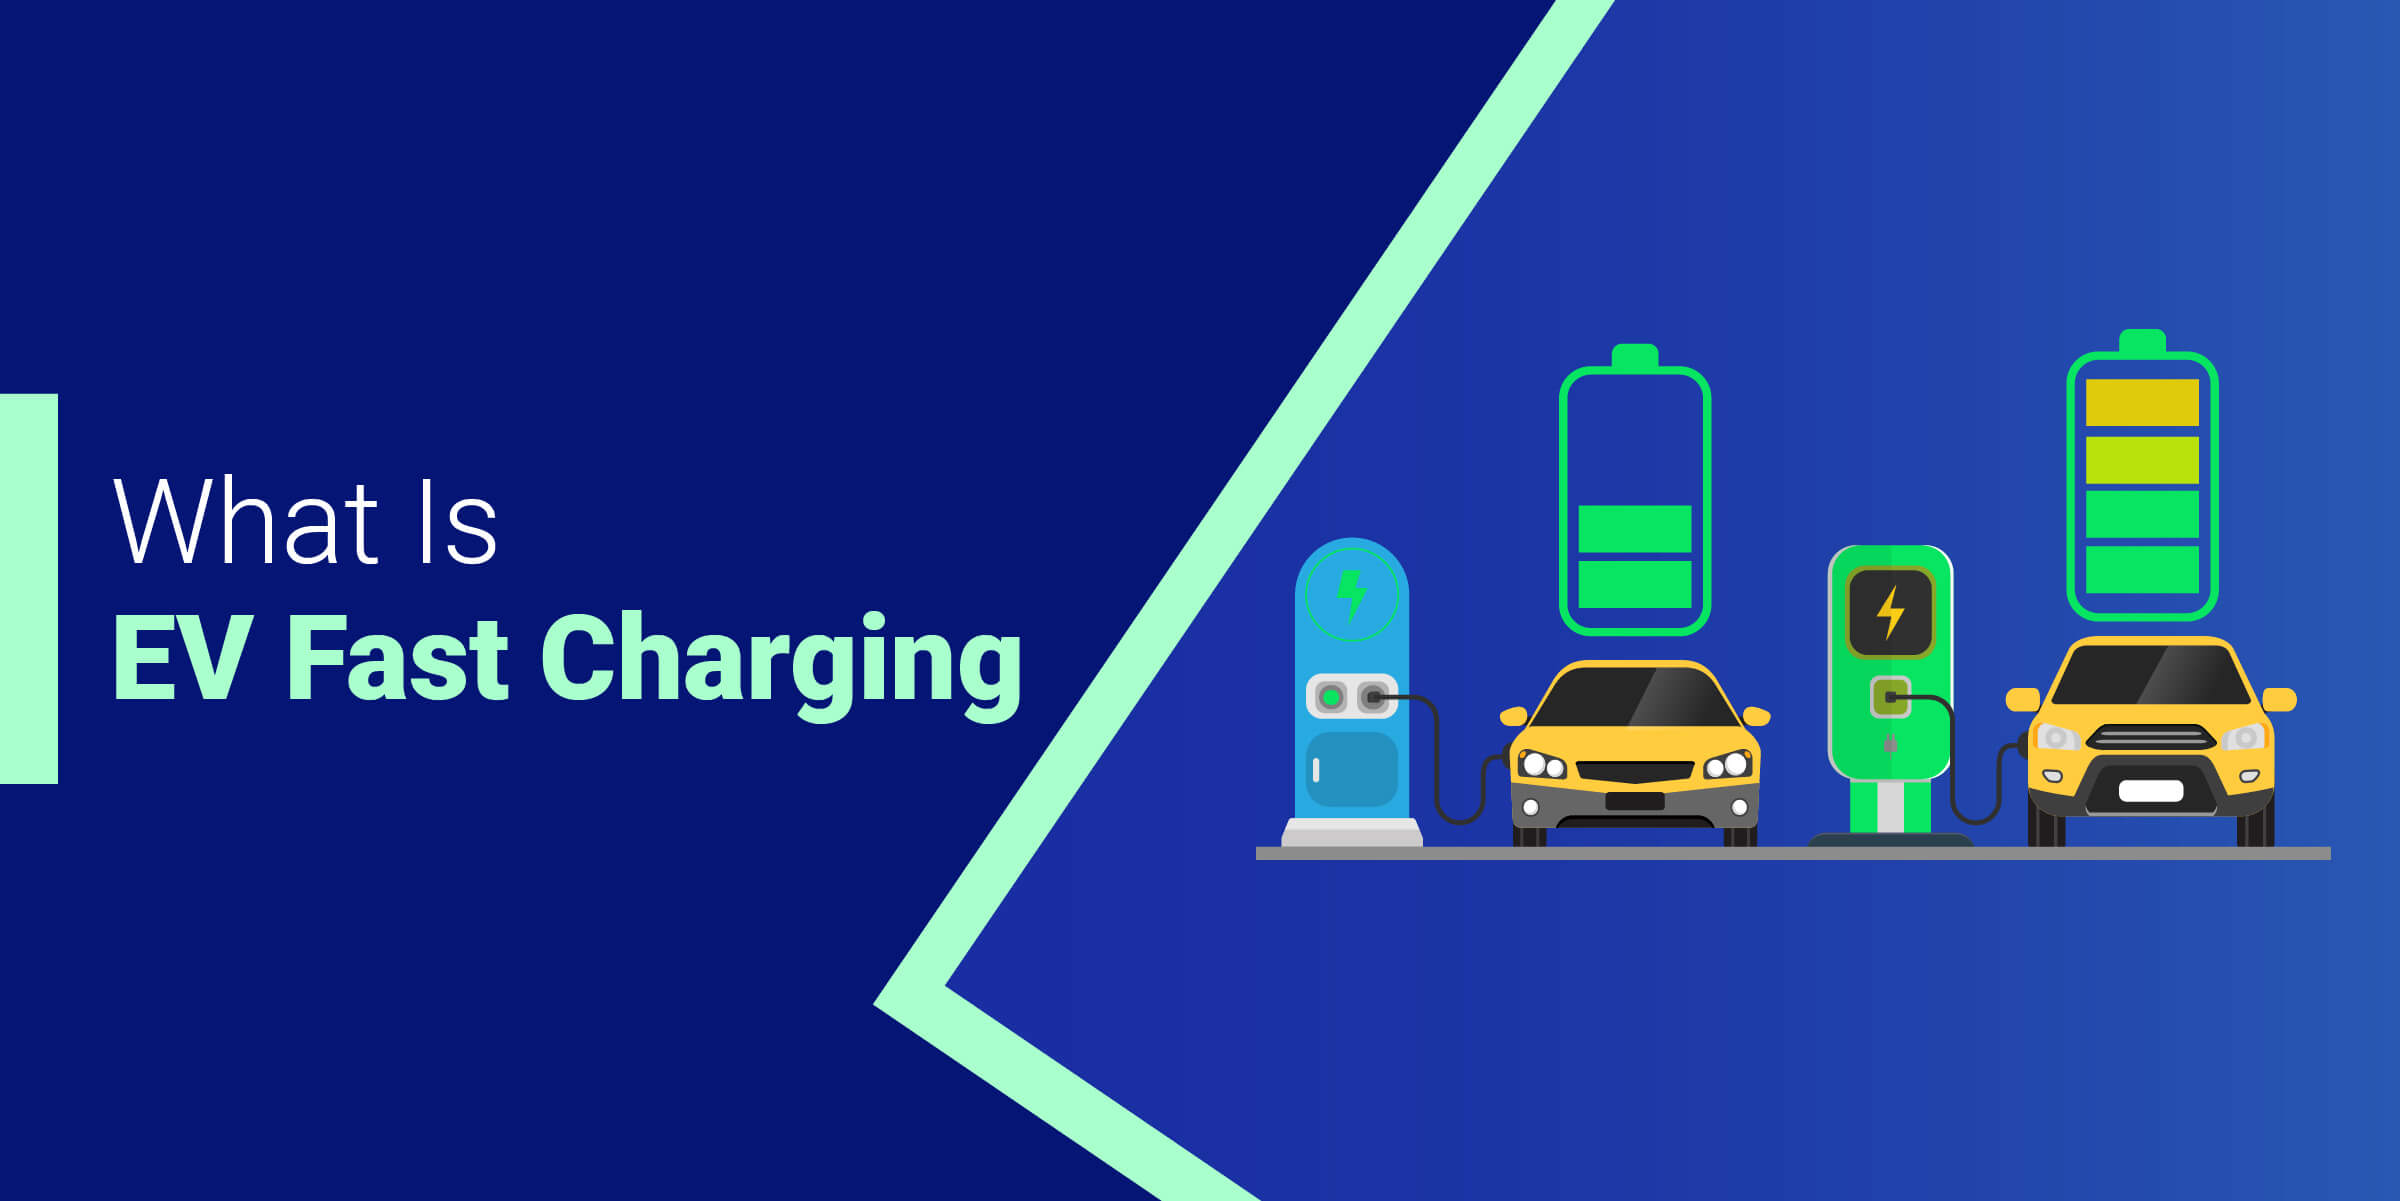 What Is EV Fast Charging